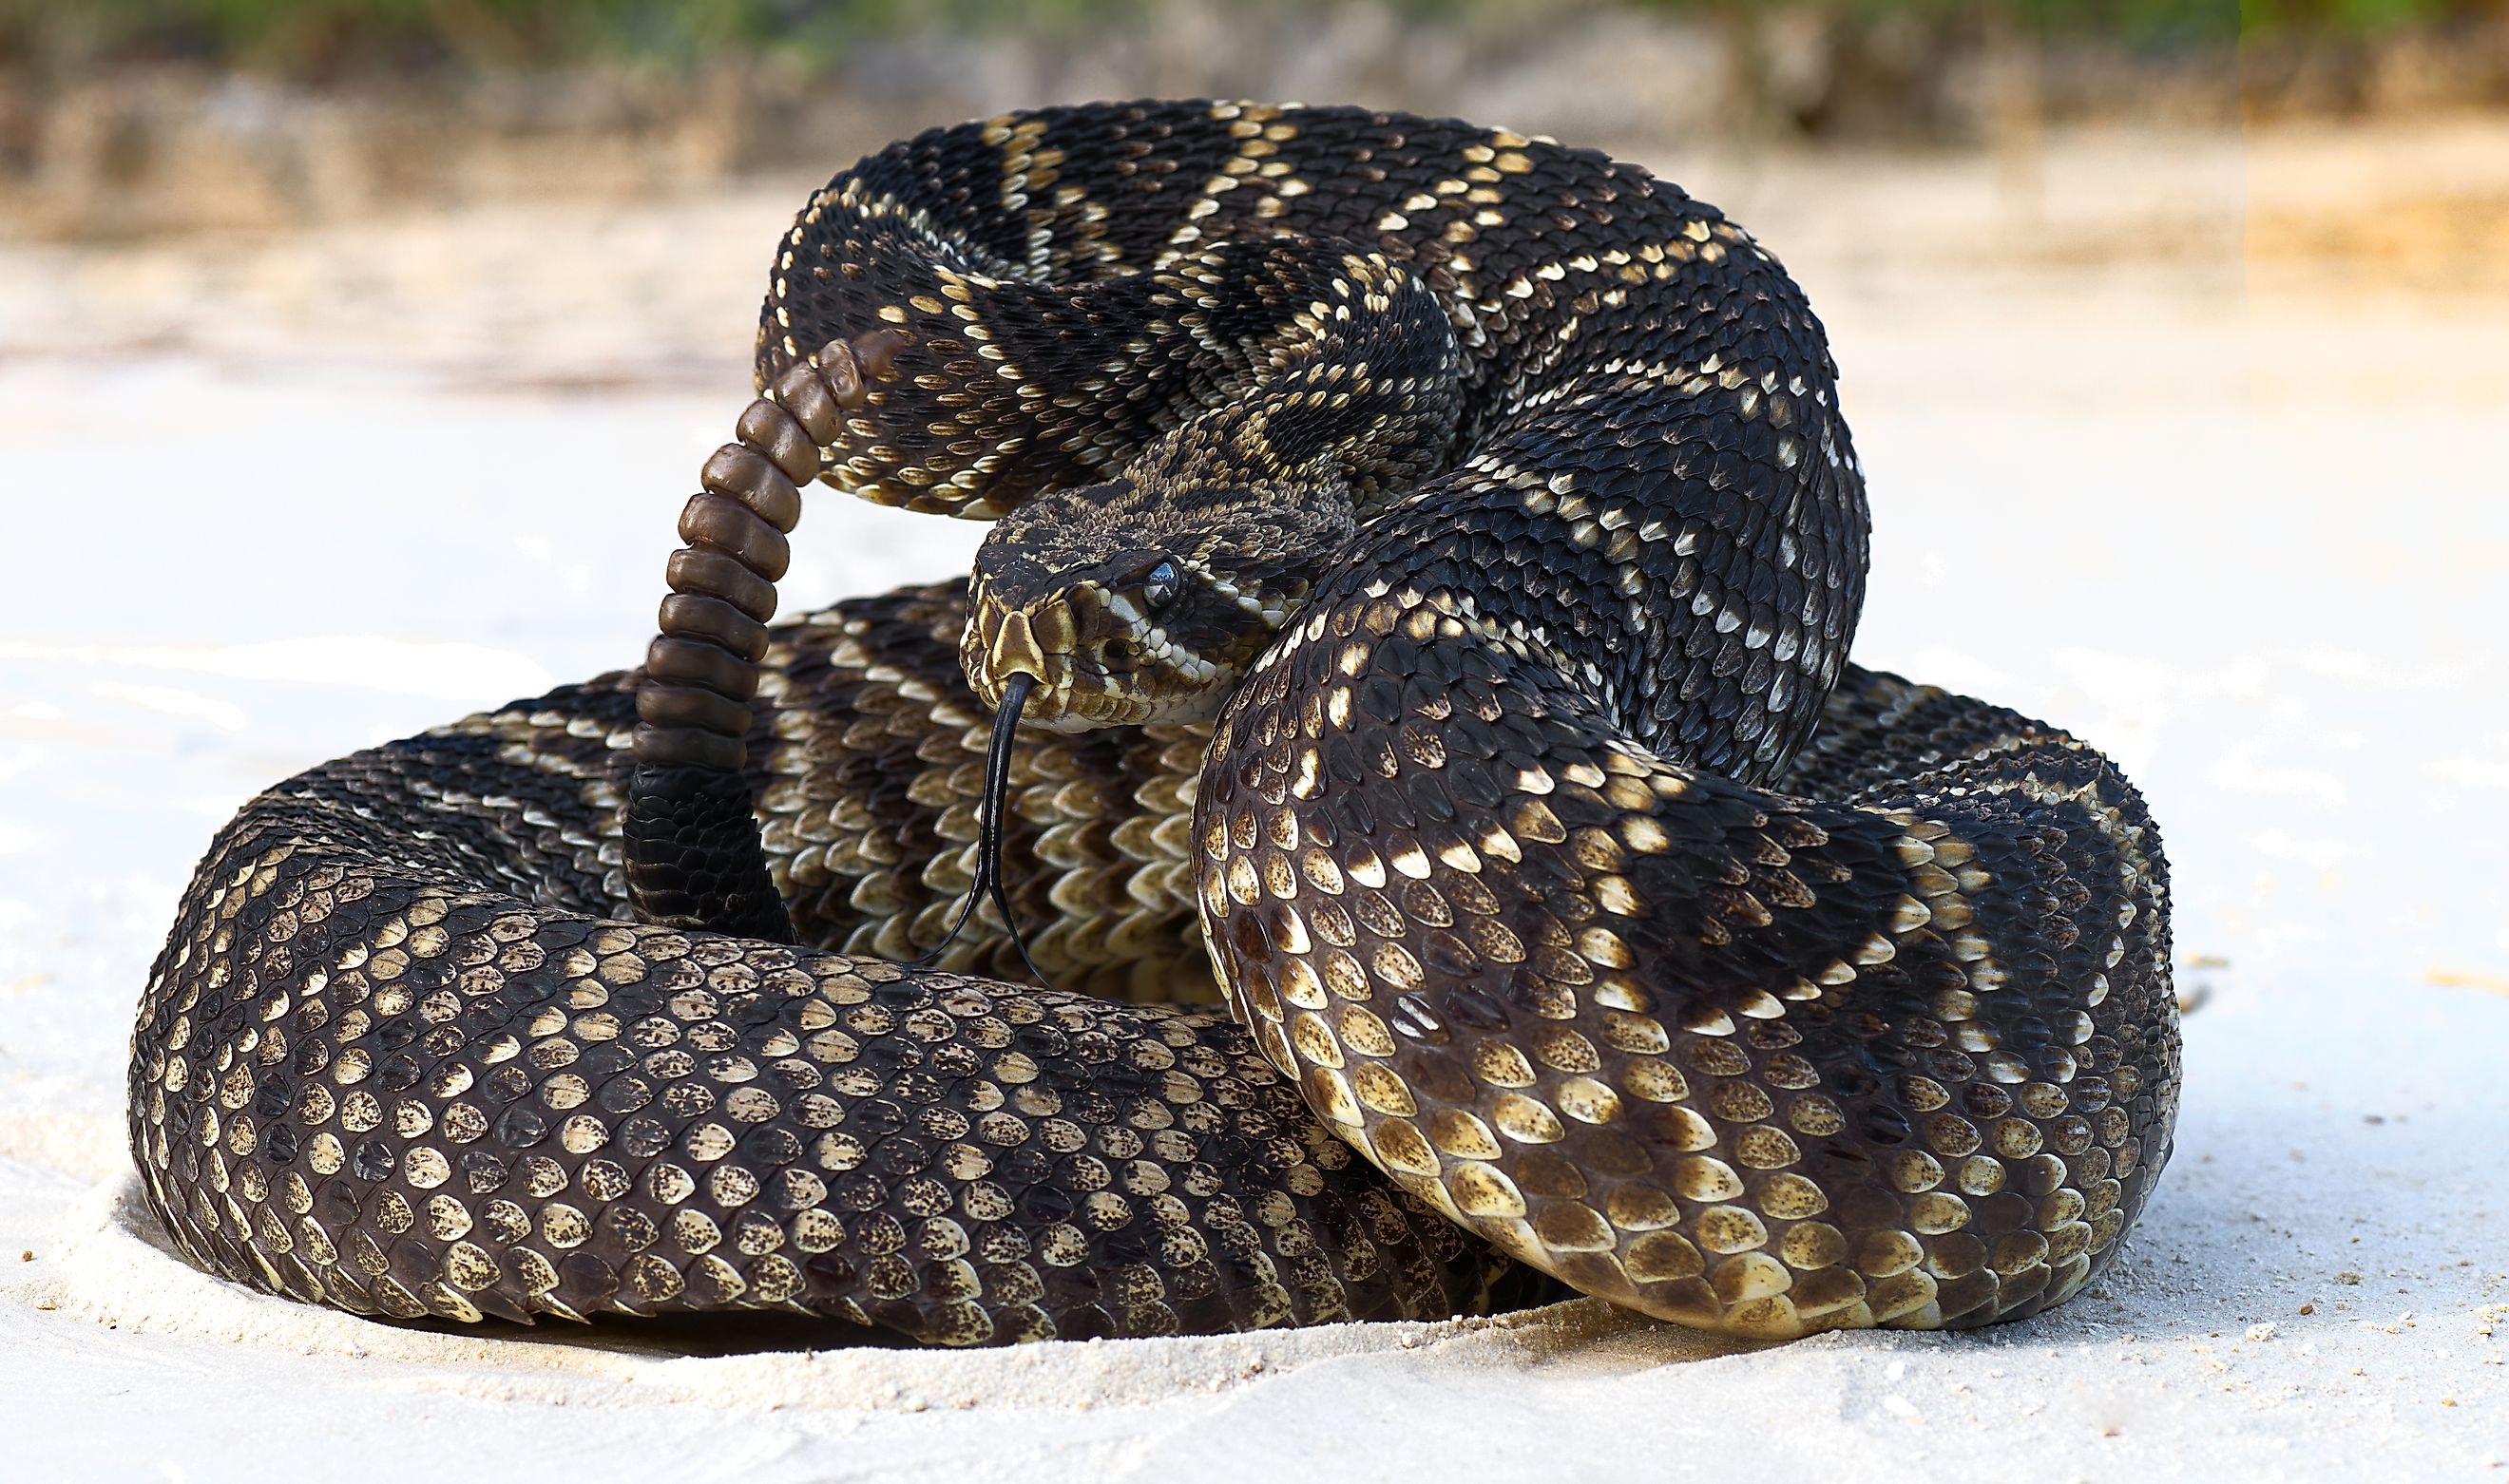 Eastern diamondback rattlesnake (Crotalus adamanteus) coiled in defensive strike pose on a sandy road in Central Florida.